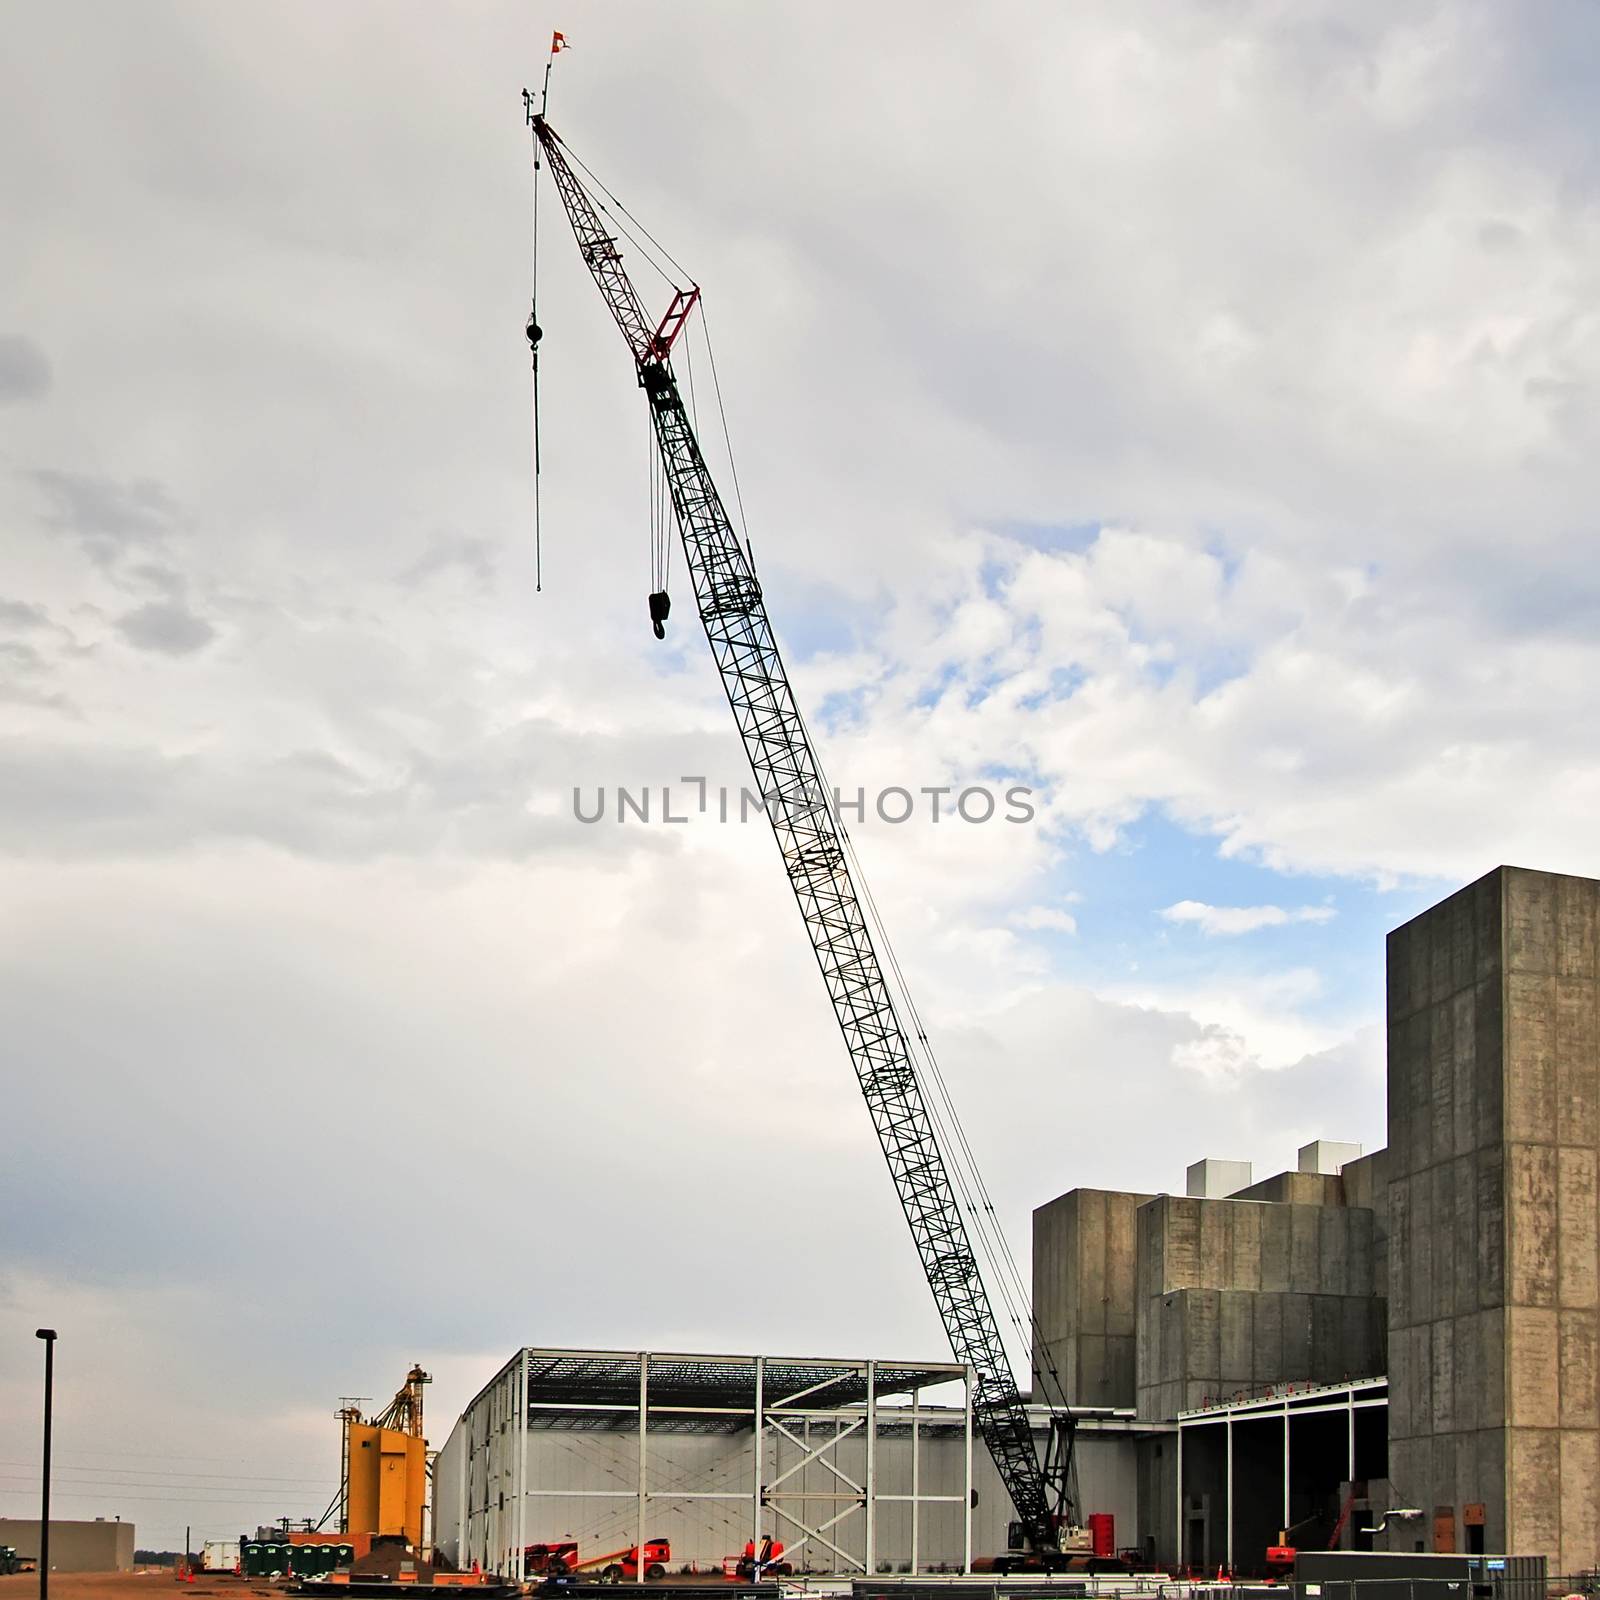 Large crane at a construction site. A new facility build in a suburban community creating new jobs.